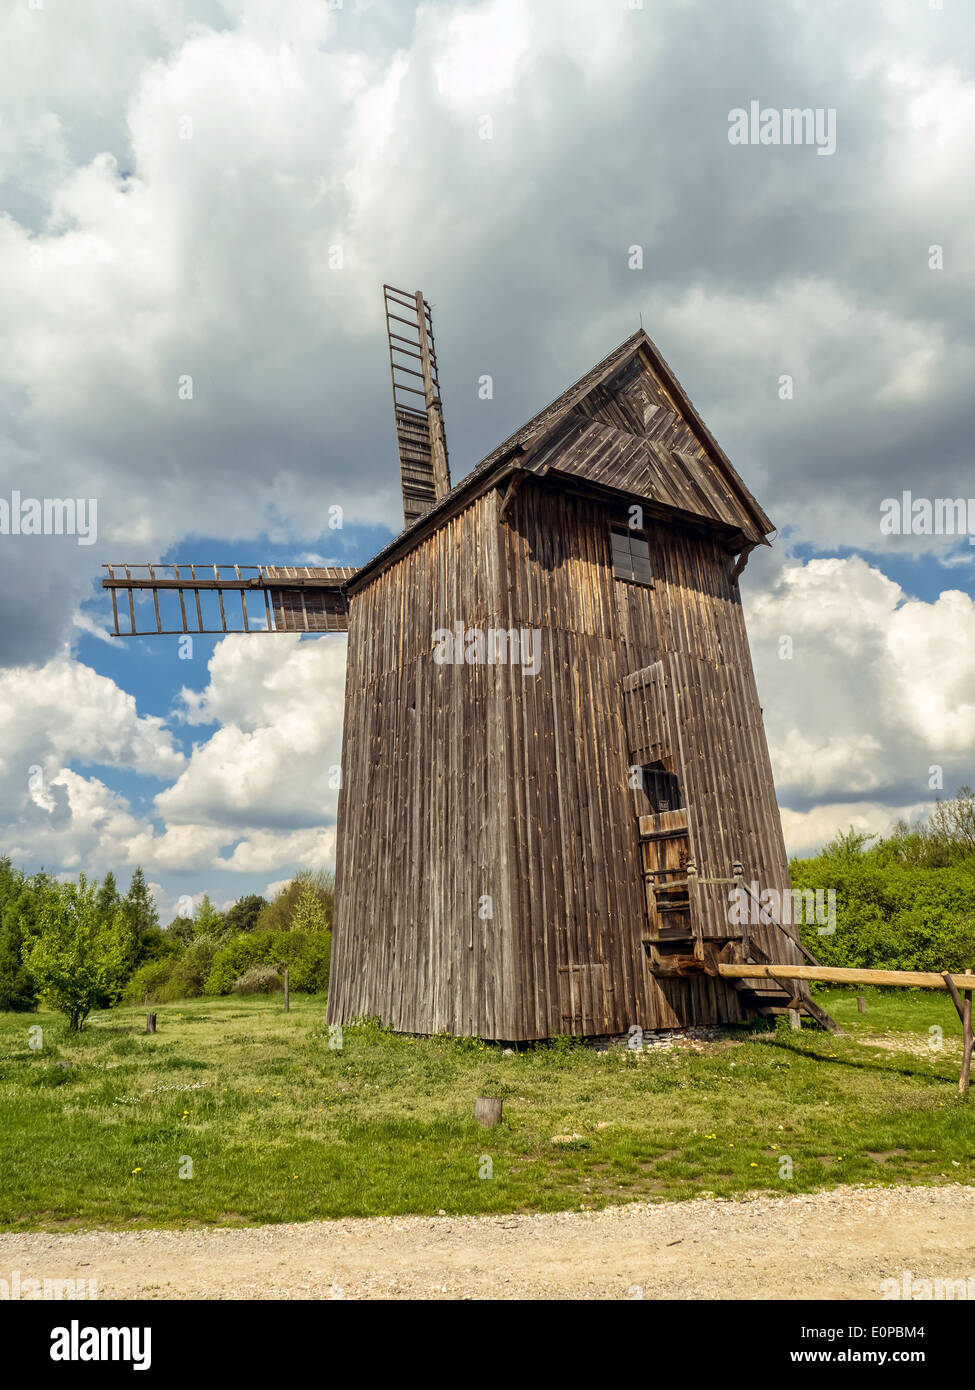 Old wooden windmill against blue sky Stock Photo